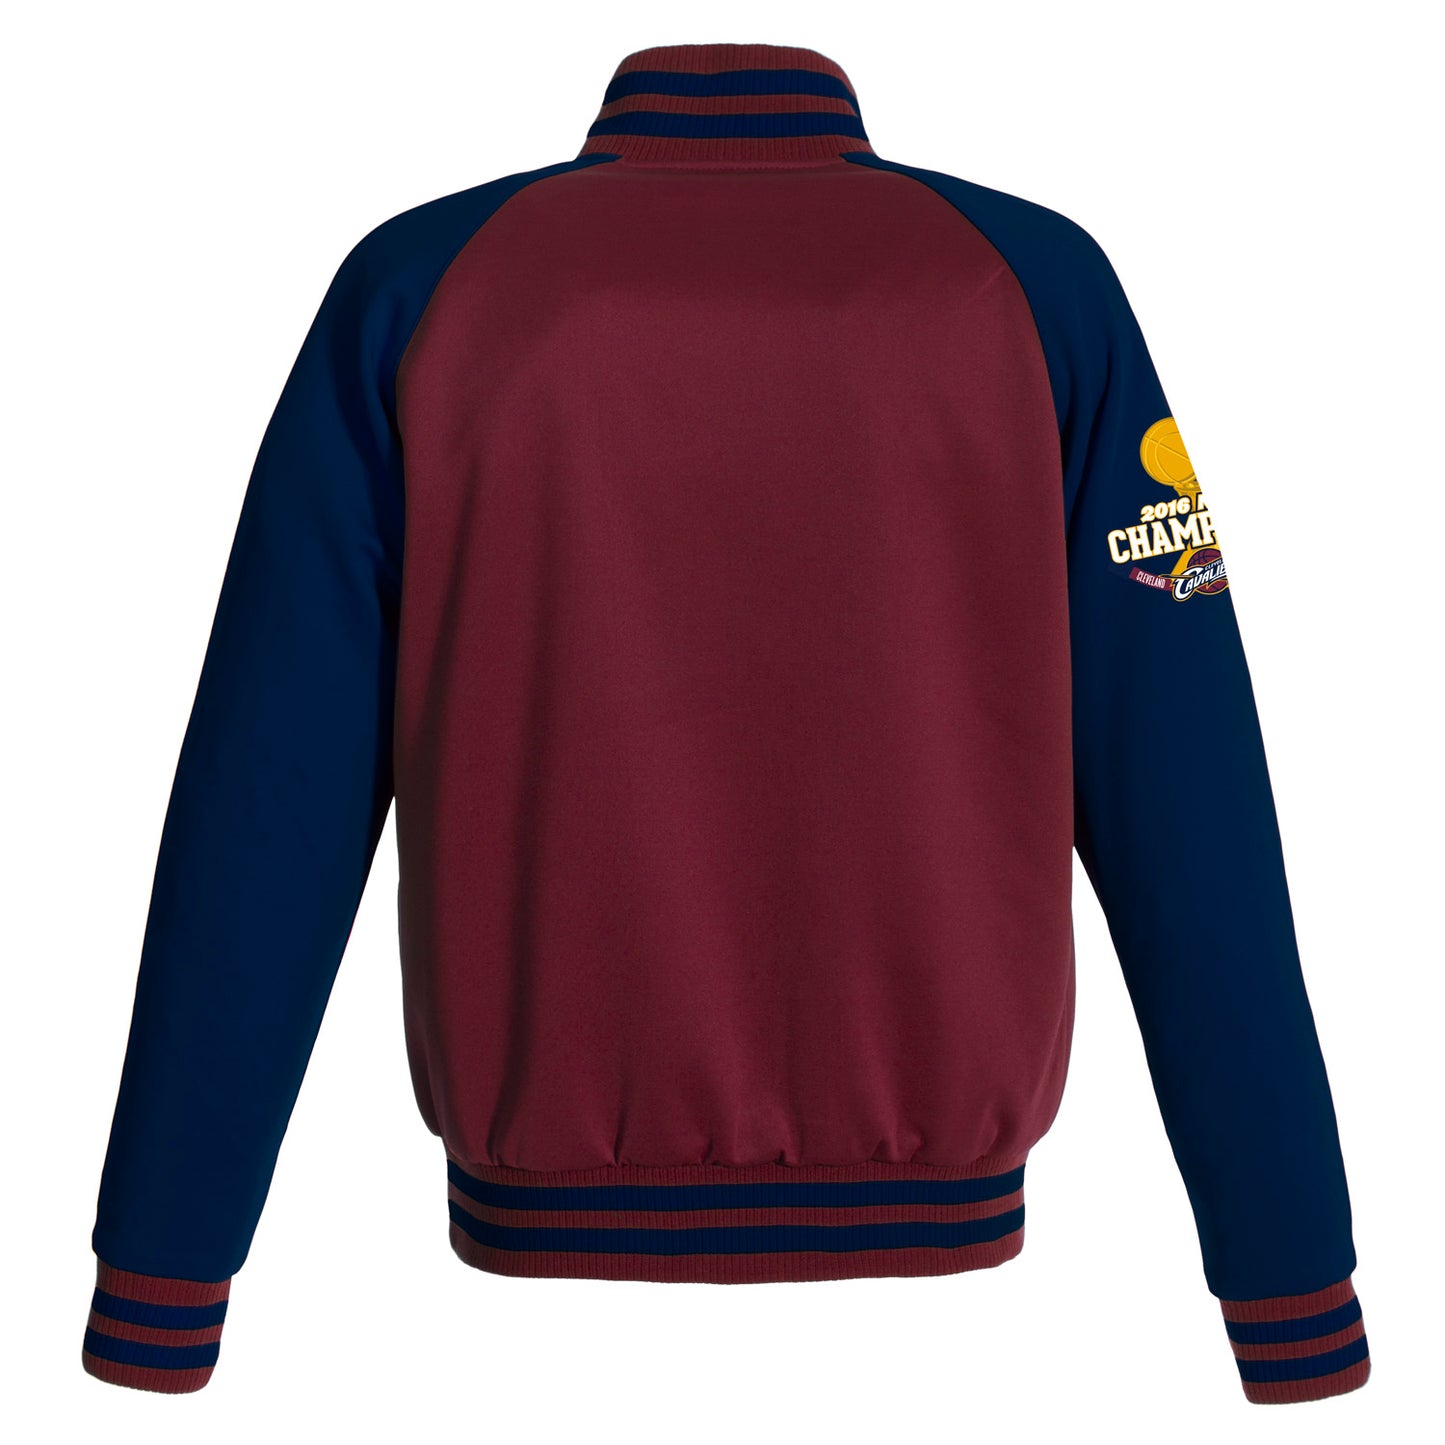 Cleveland Cavaliers Kid's 2016 Championship Polyester Jacket